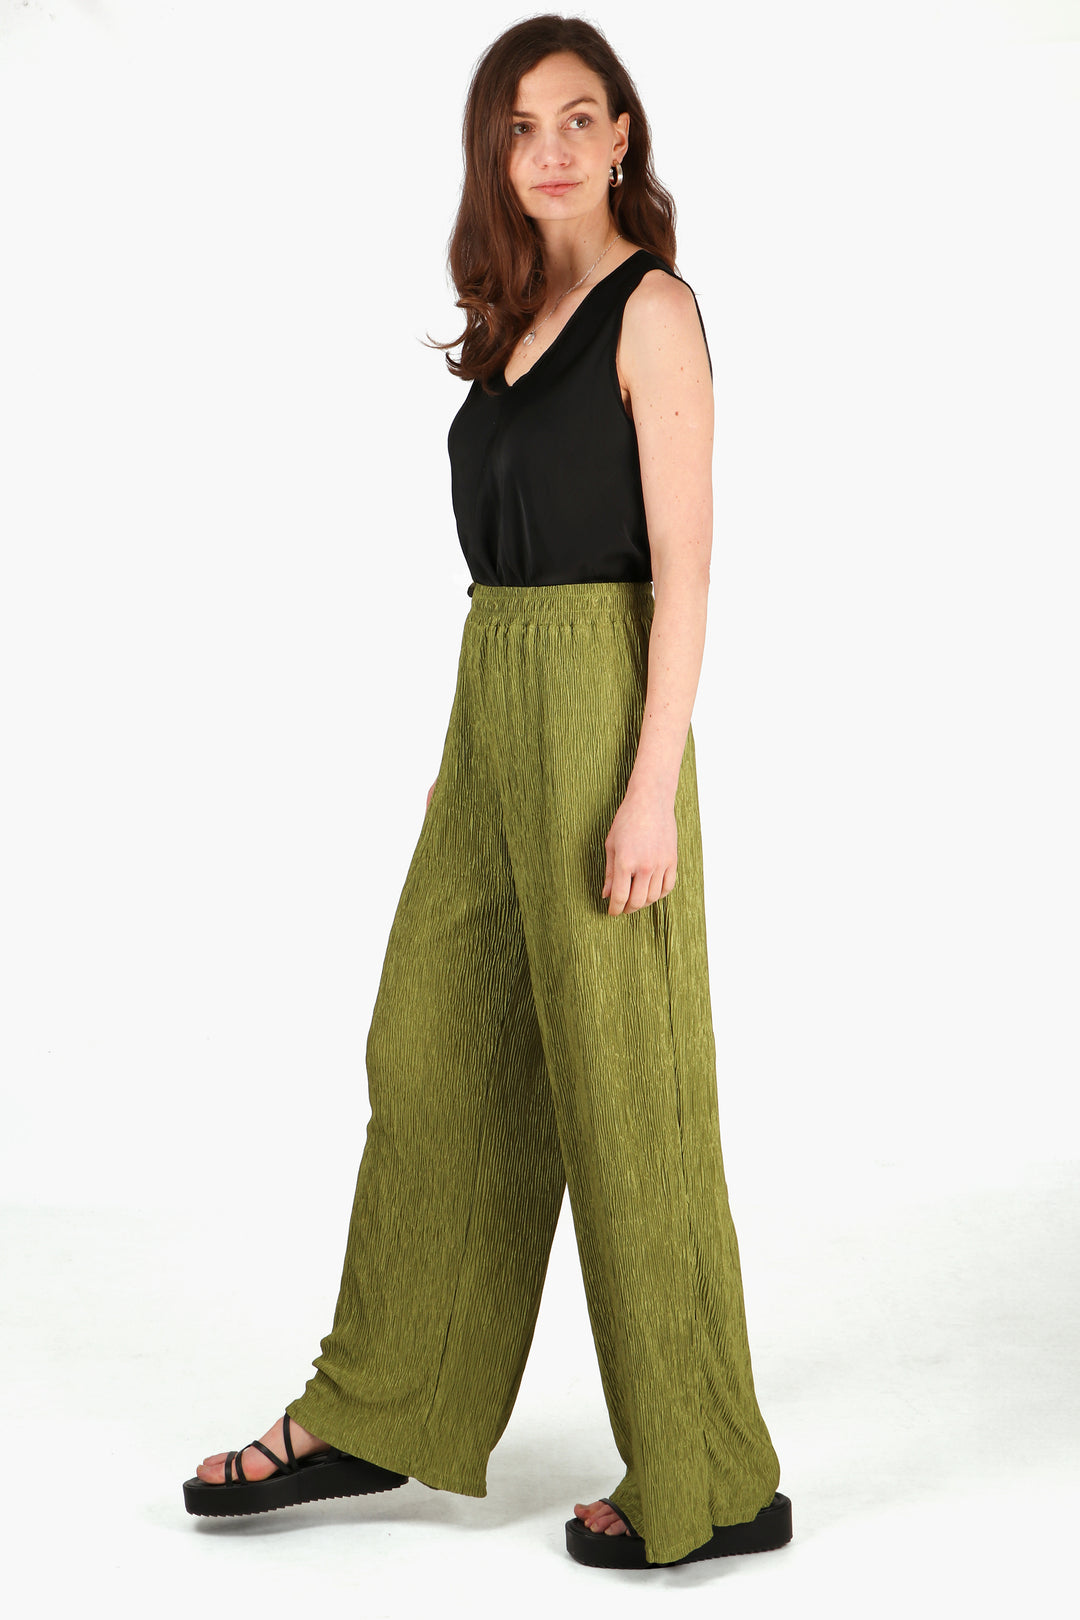 model wearing a pair of plisse material long trousers in an olive green colour